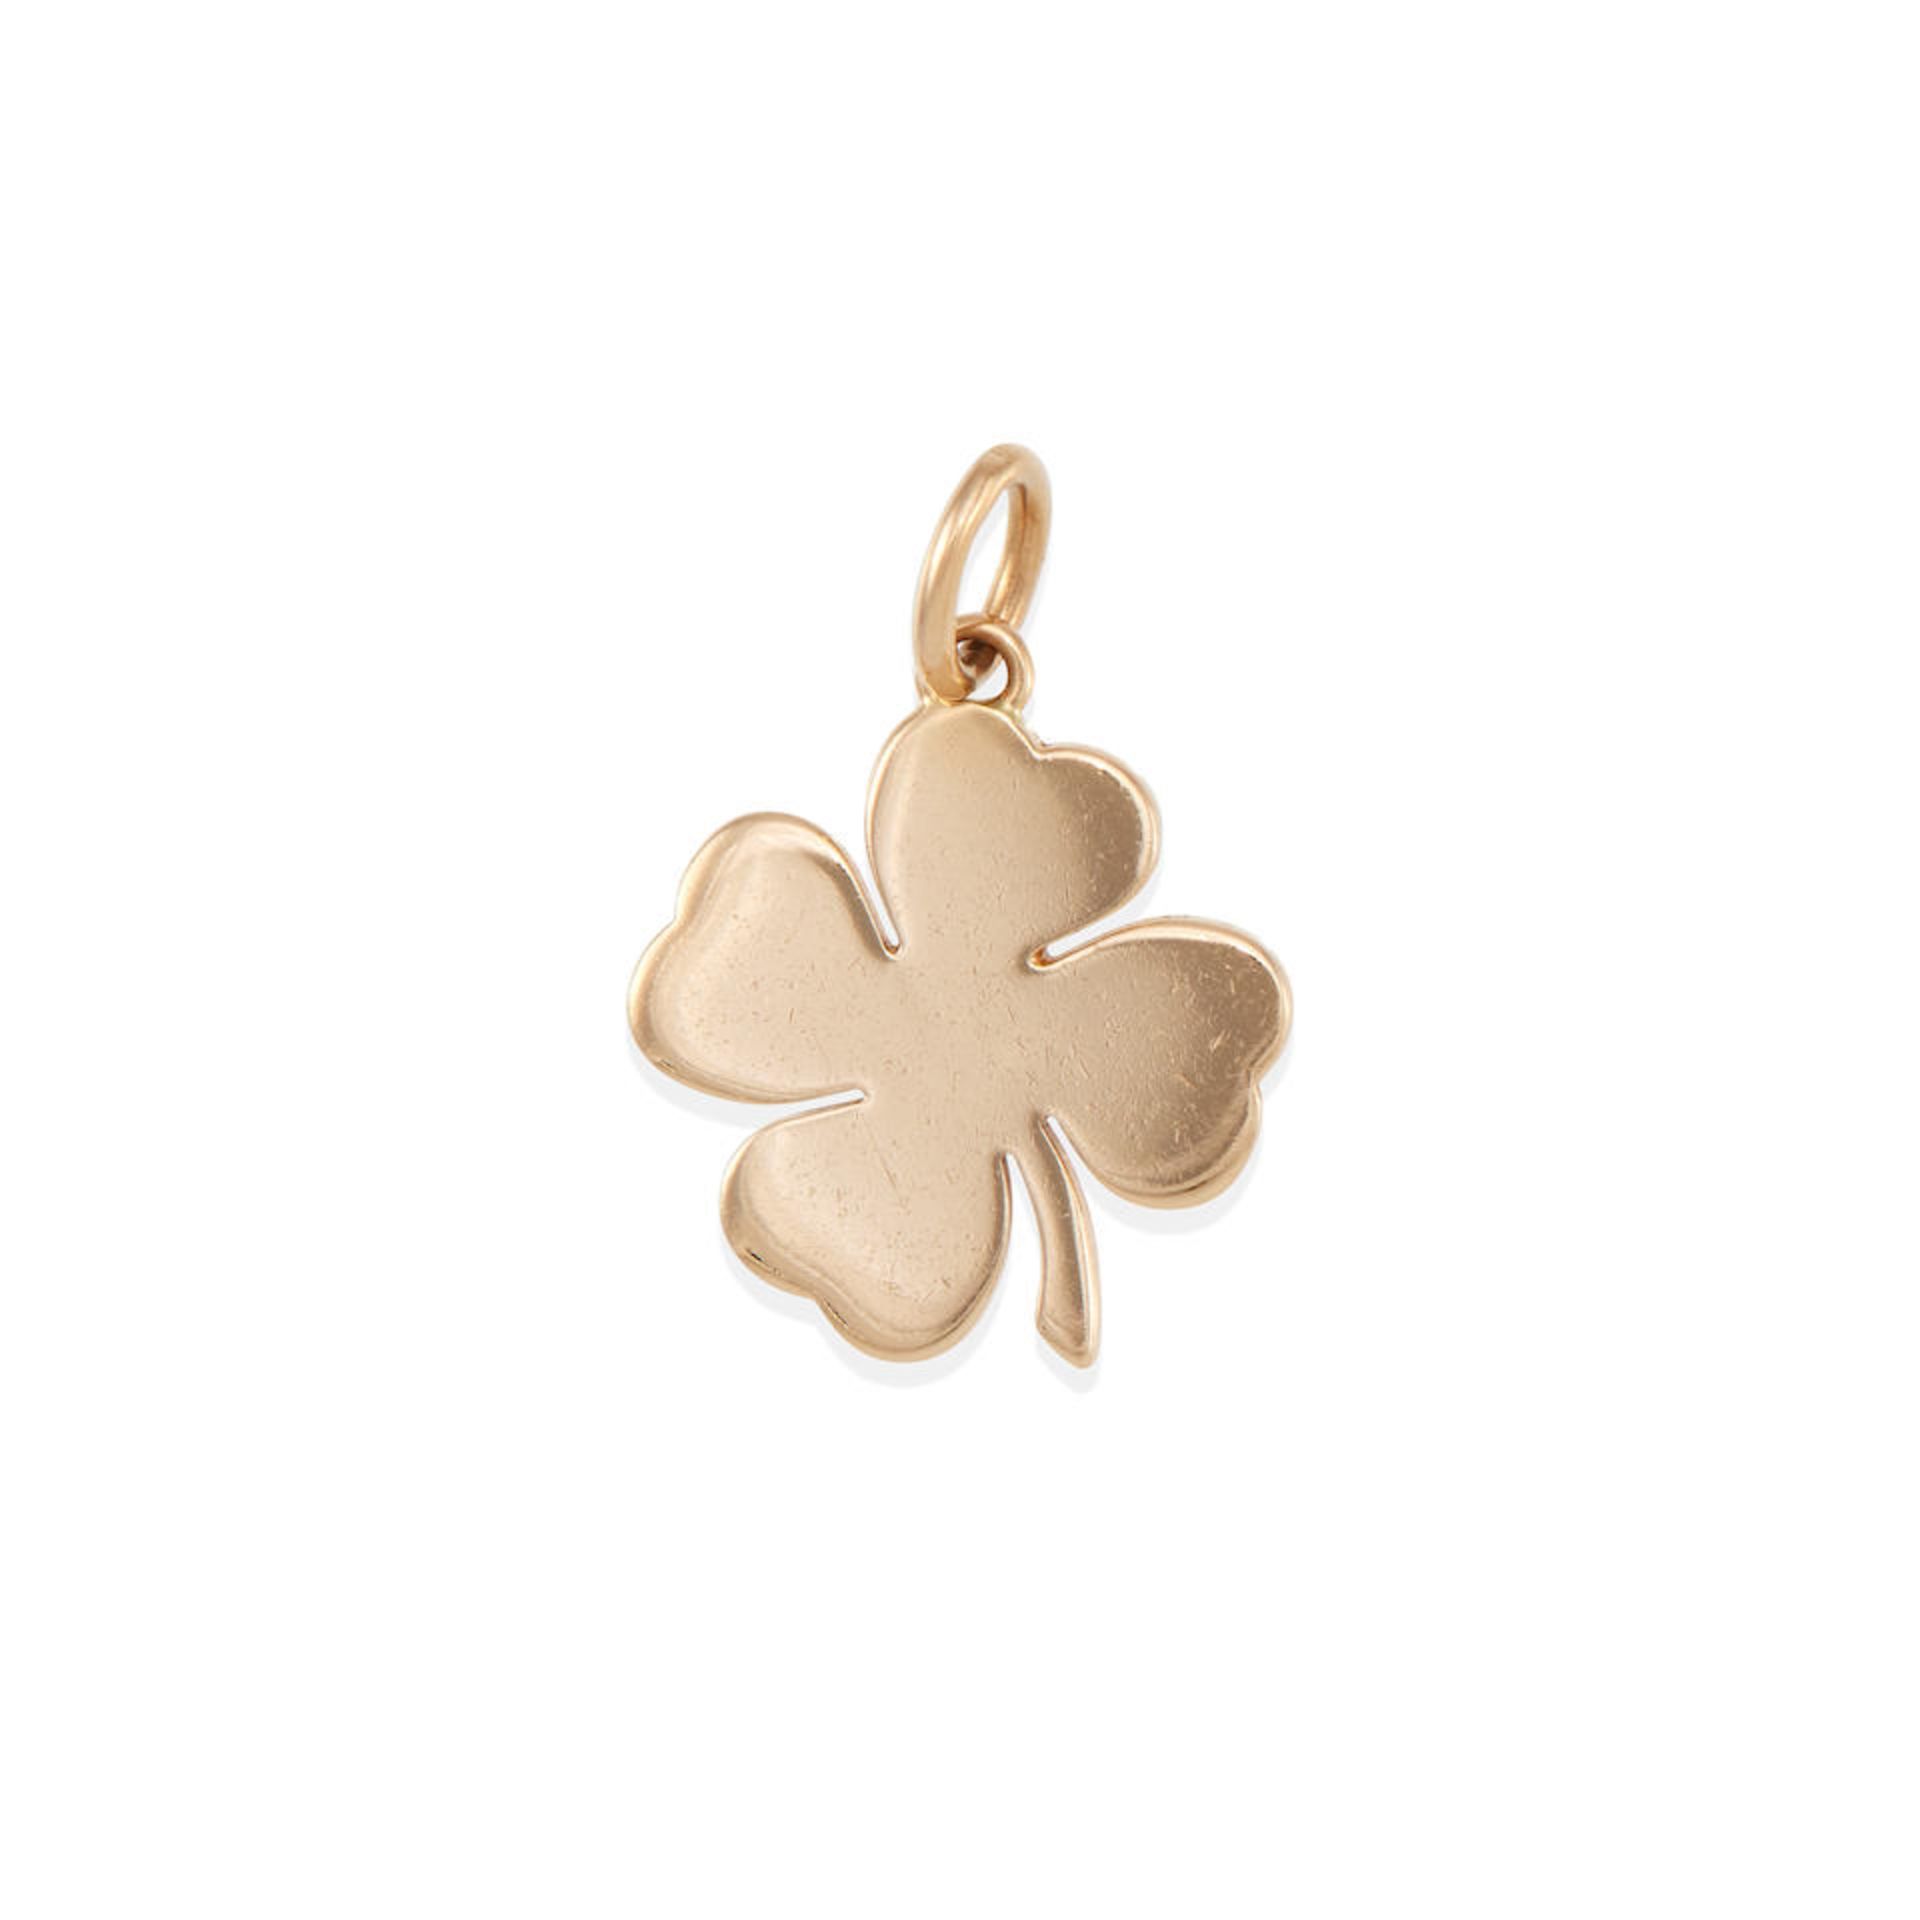 TIFFANY & CO.: AN 18K ROSE GOLD CLOVER CHARM